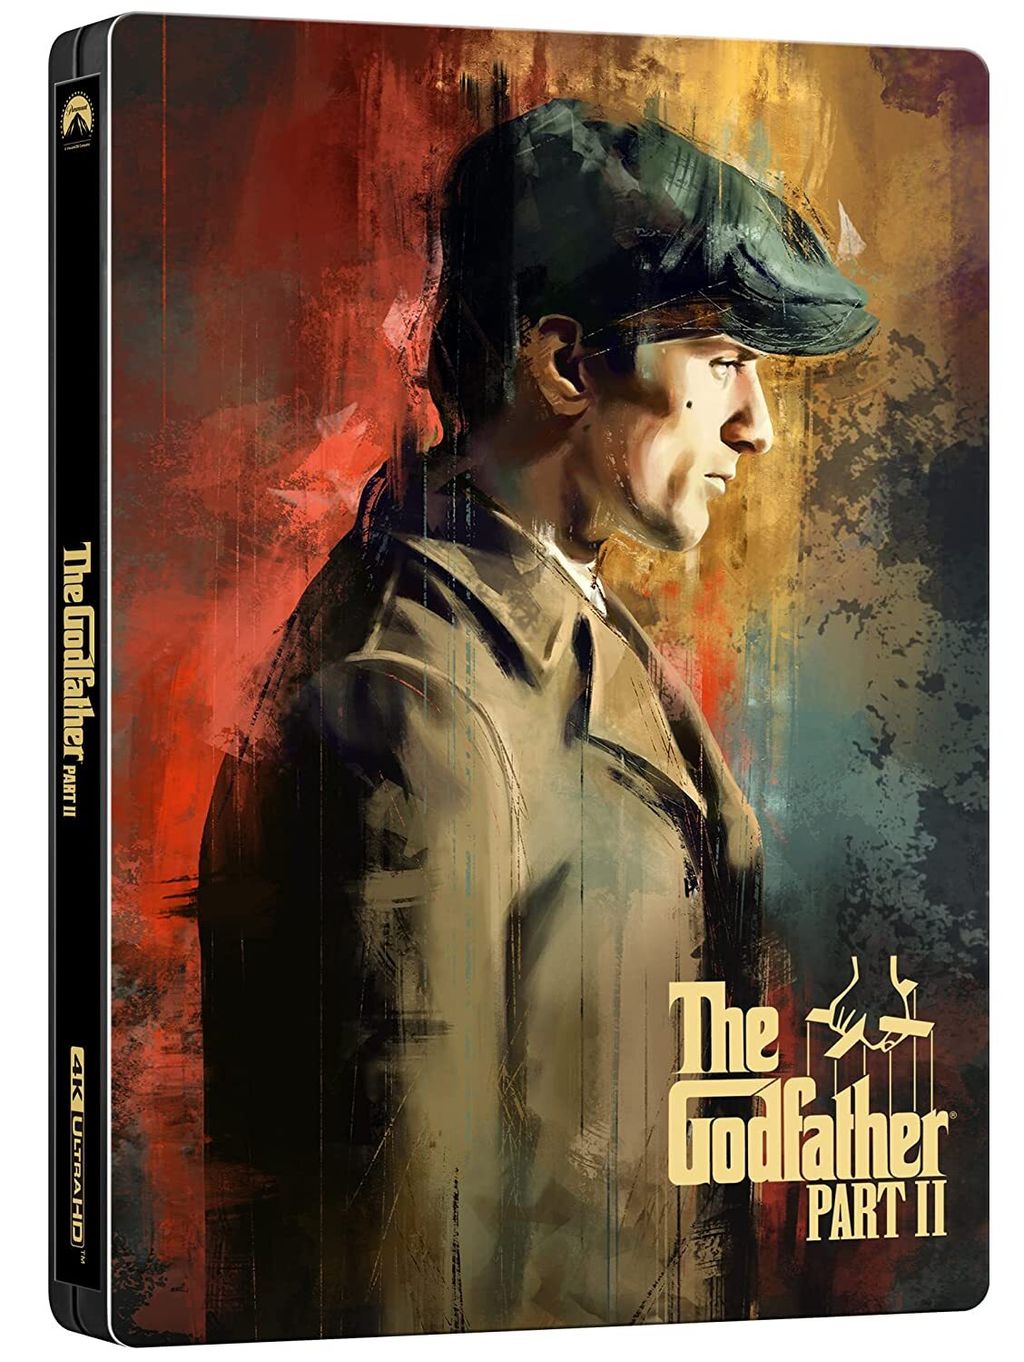 THE GODFATHER Part II 4K Ultra-HD Limited Edition STEELBOOK2